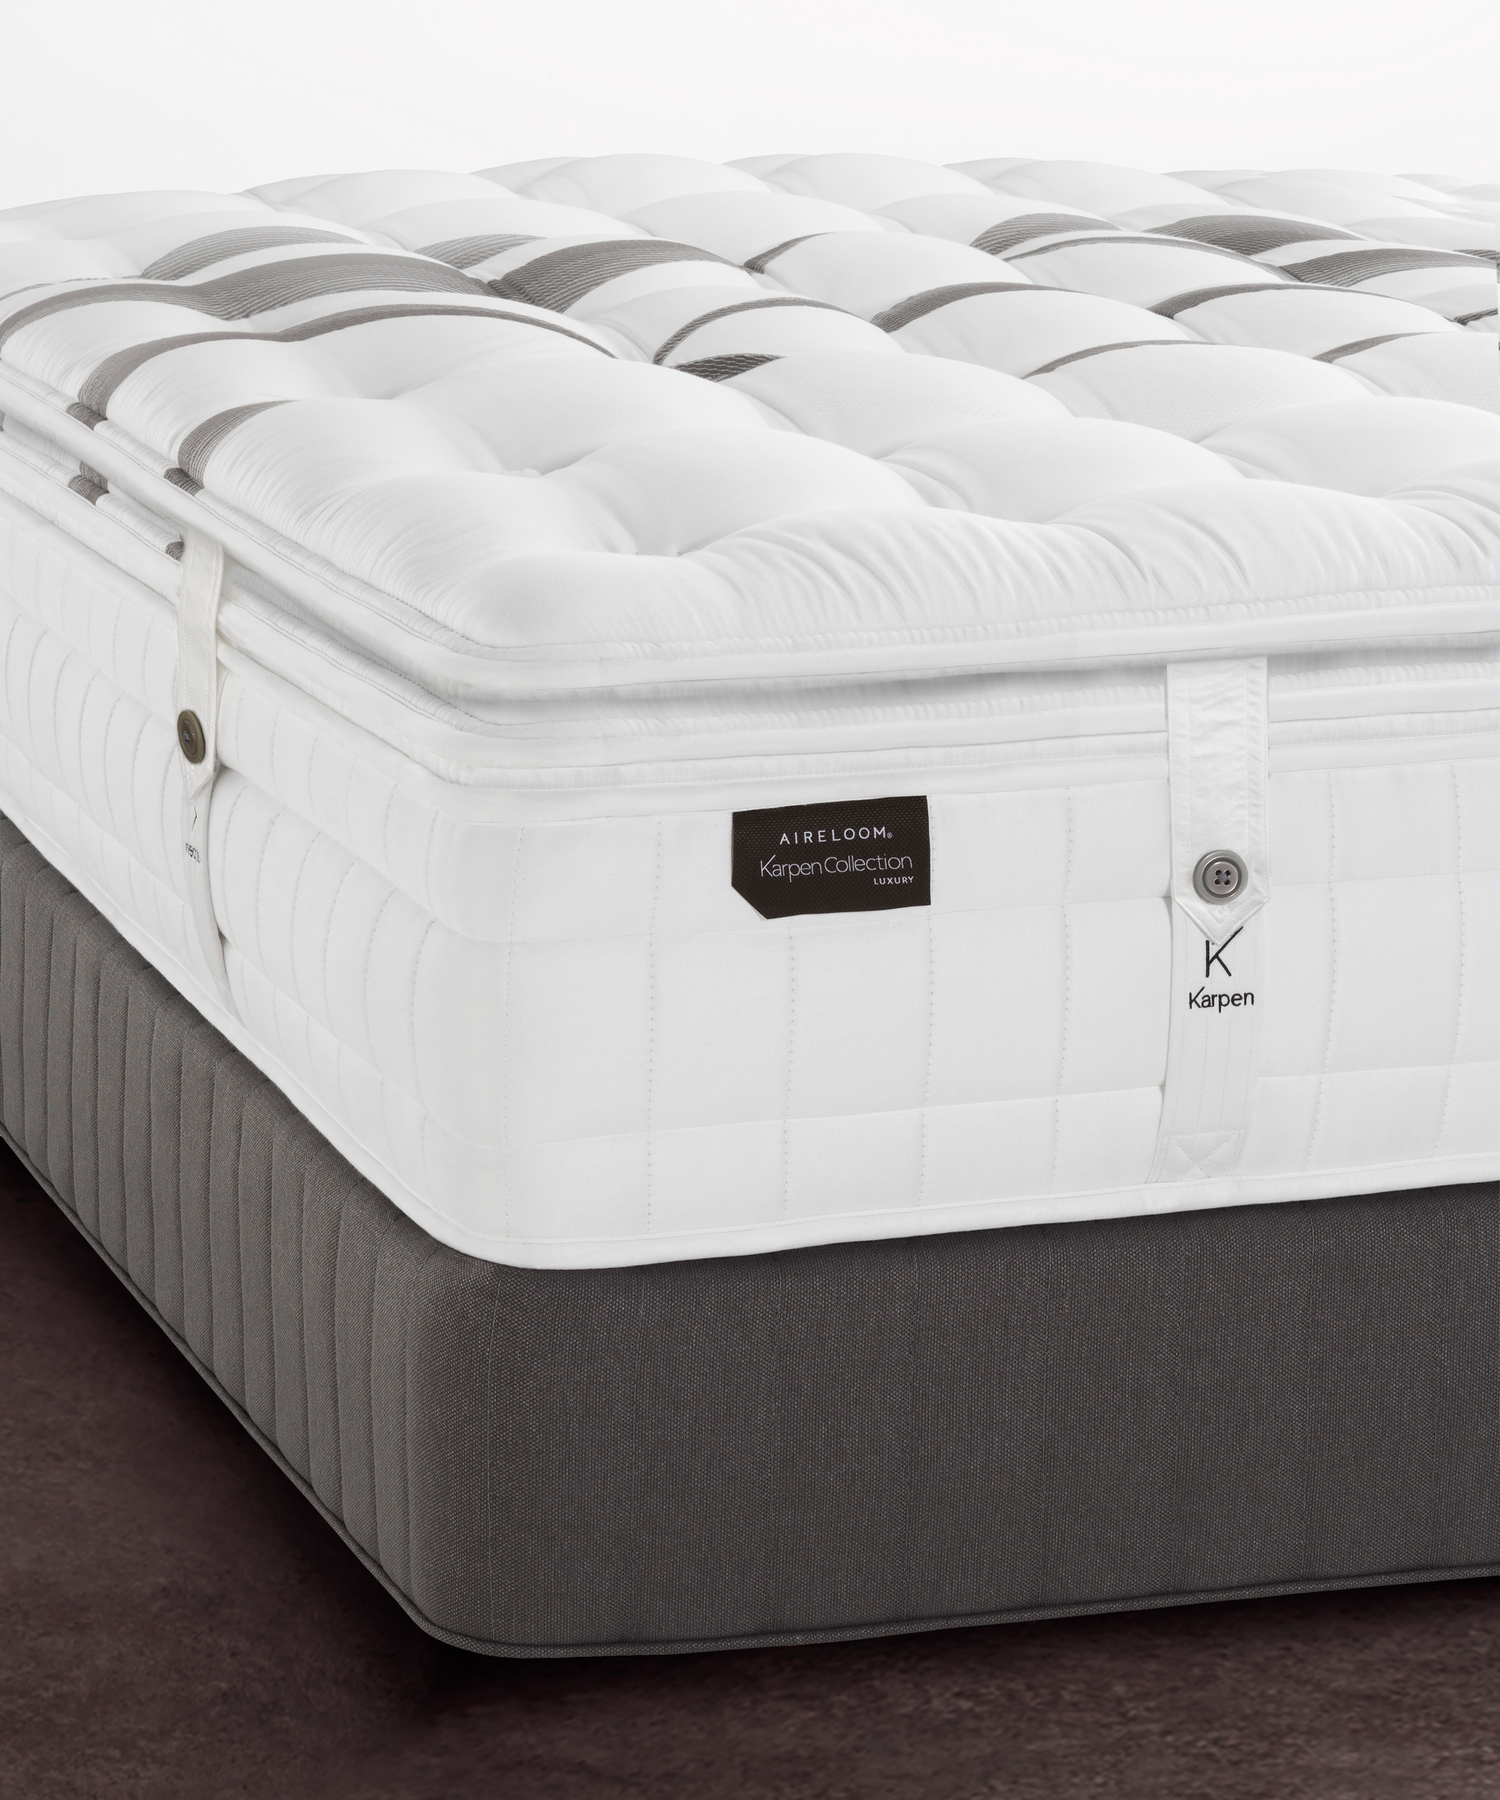 The Karpen Collection is Aireloom's top-of-the-line mattress constructed much like just like its co-brand Kluft mattresses.  Both Aireloom and Kluft mattresses are made in the  E. S. Kluft factory in Southern California.